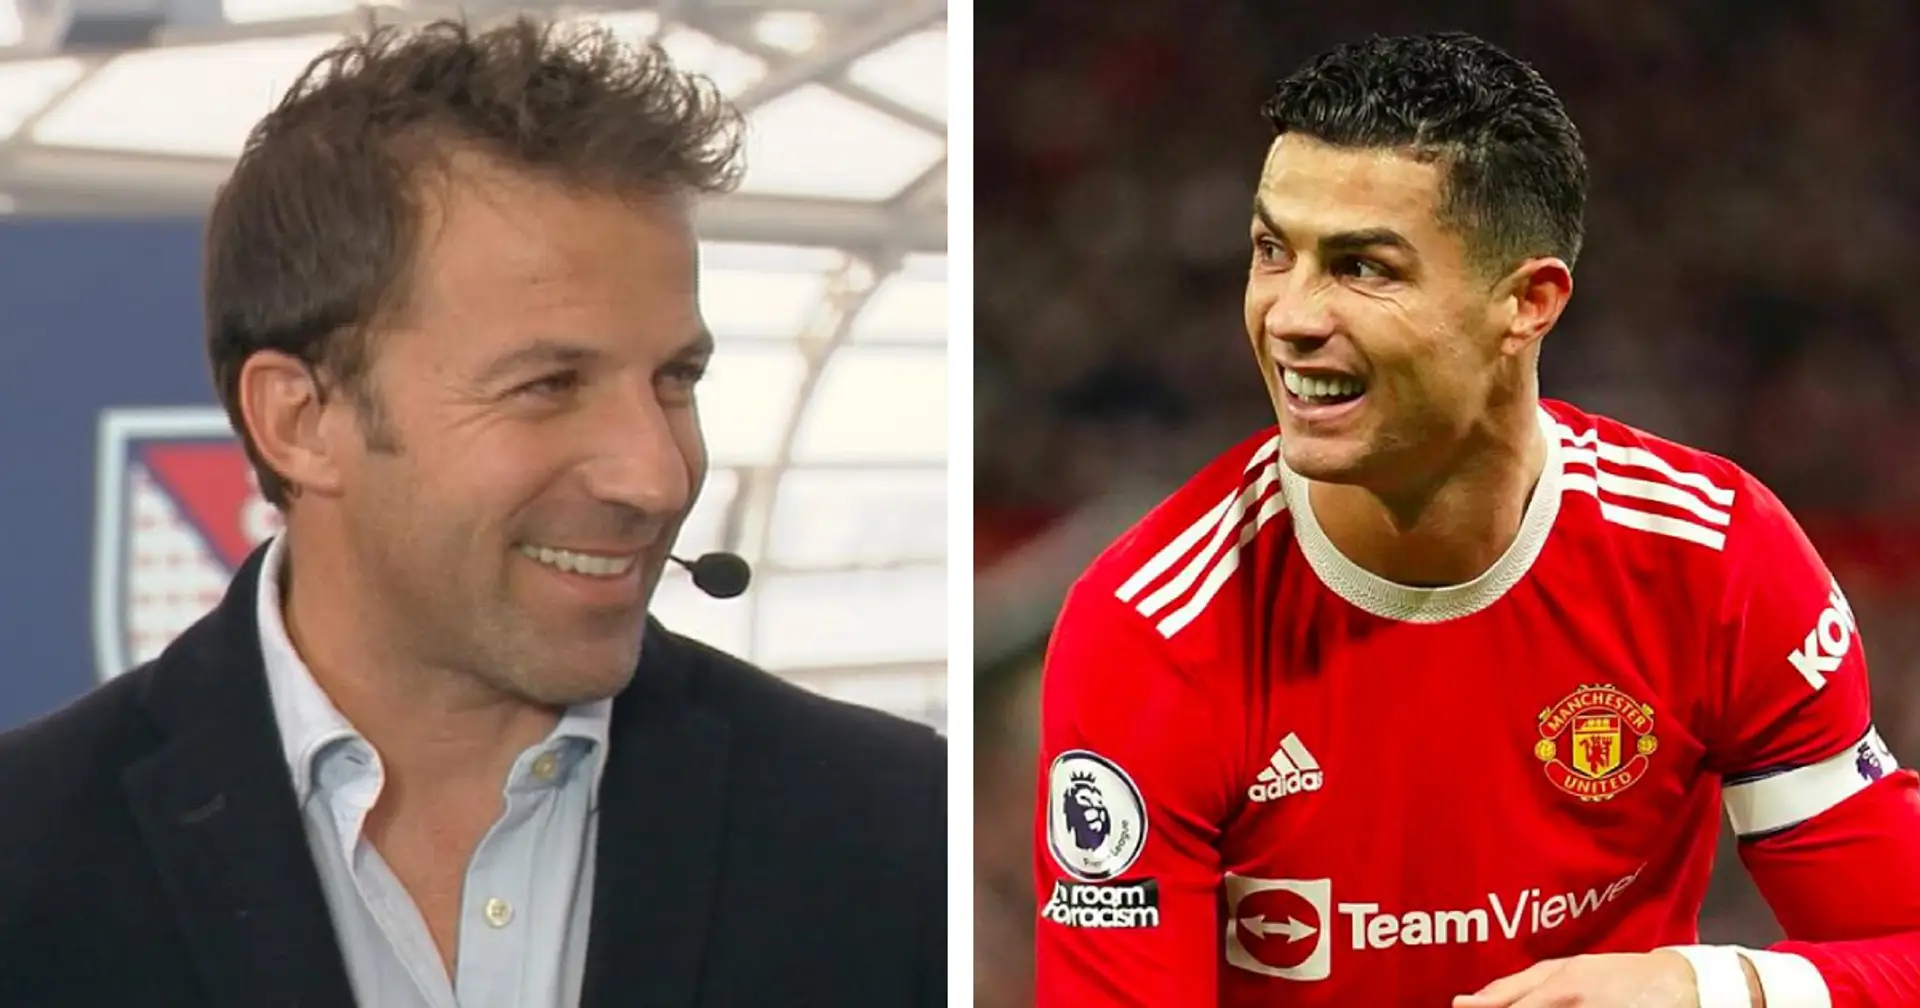 'You play in a side that's not doing well': Alessandro Del Piero explains why Ronaldo wants to leave Man United